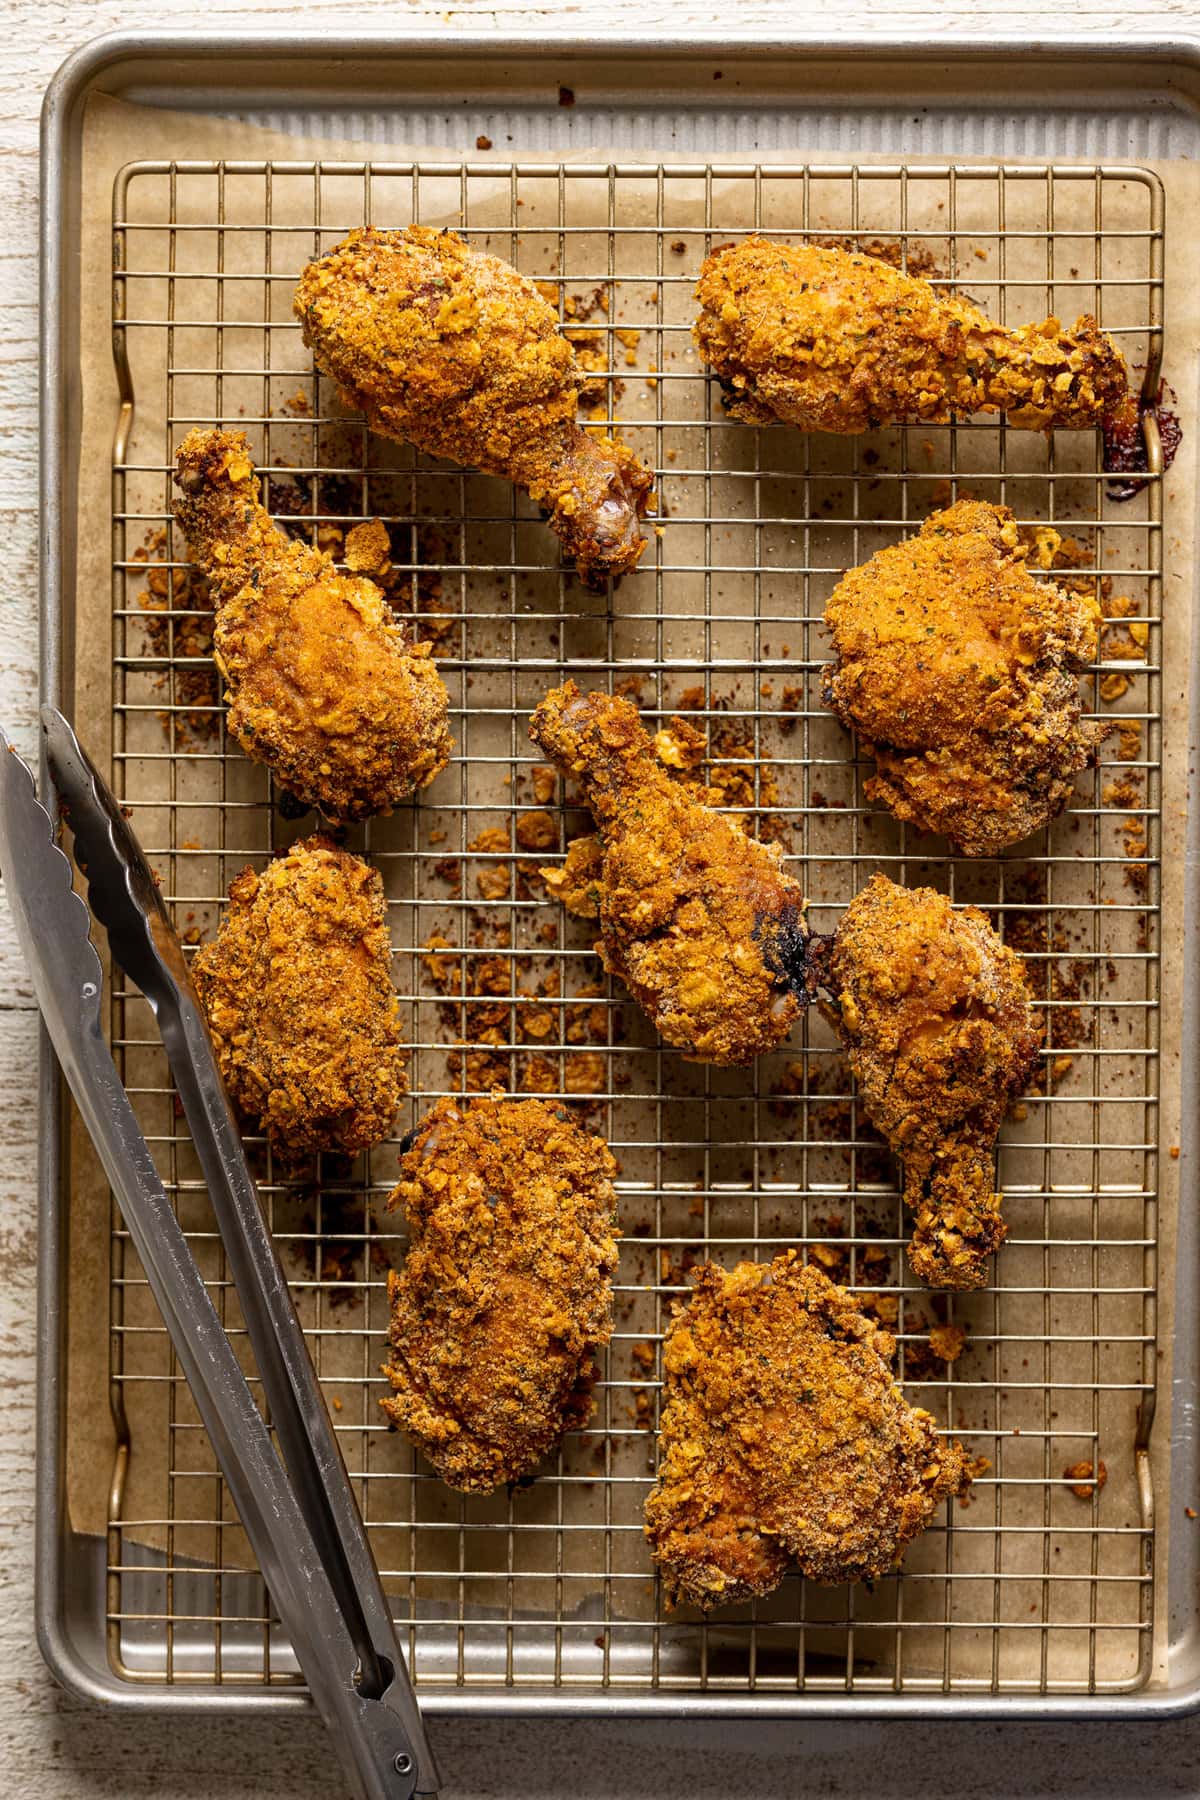 Cooked, breaded chicken on a wire rack with tongs